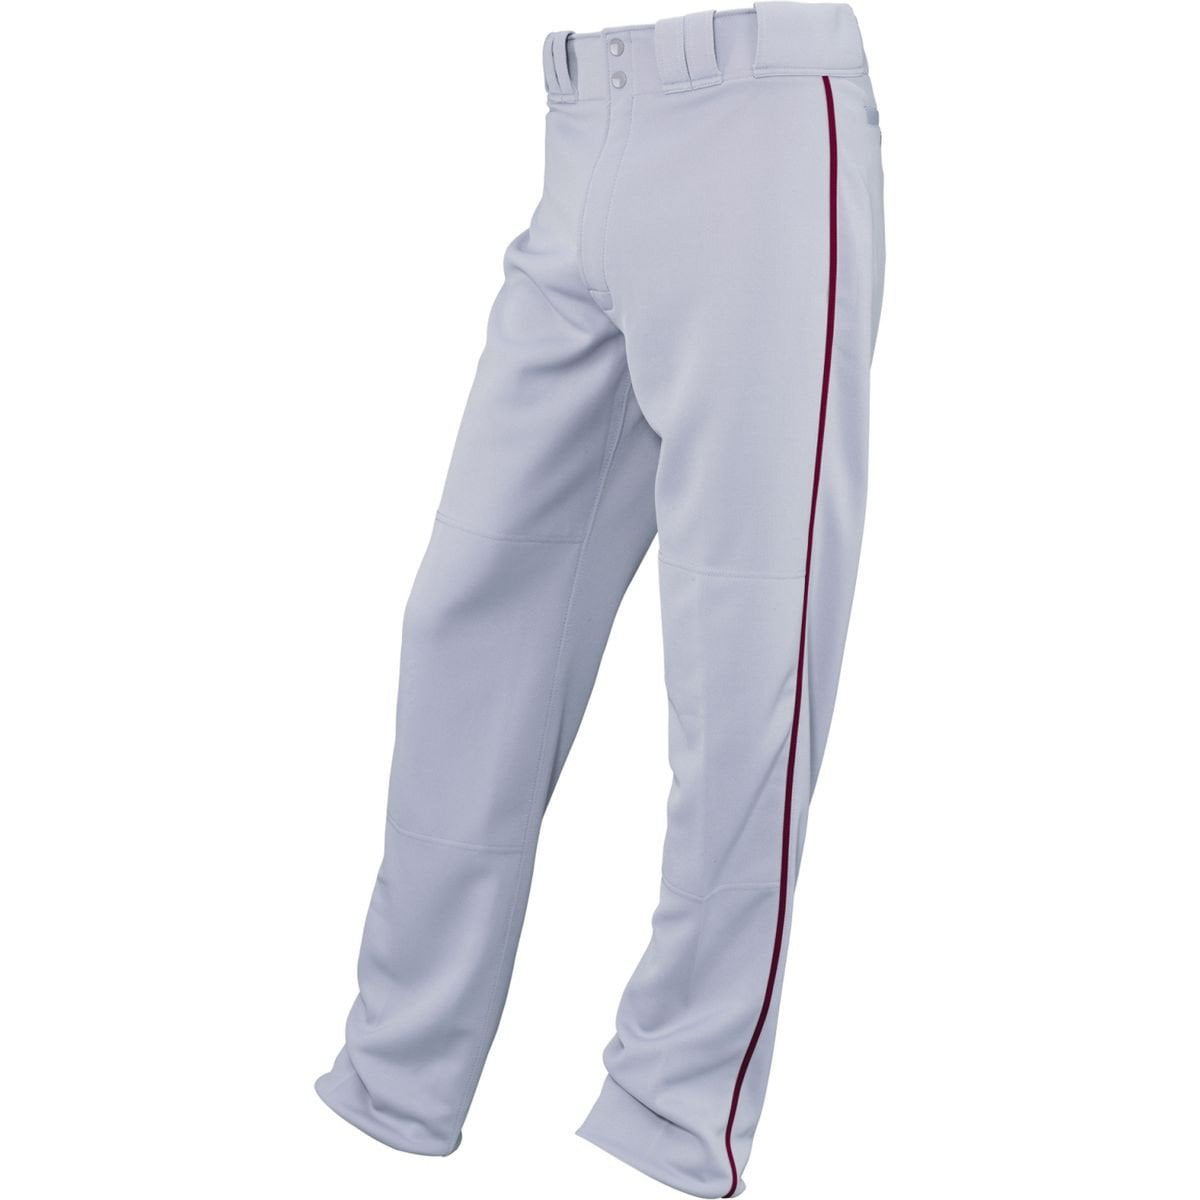 Easton Boys' Youth Quantum Plus Baseball Pants with Piping 